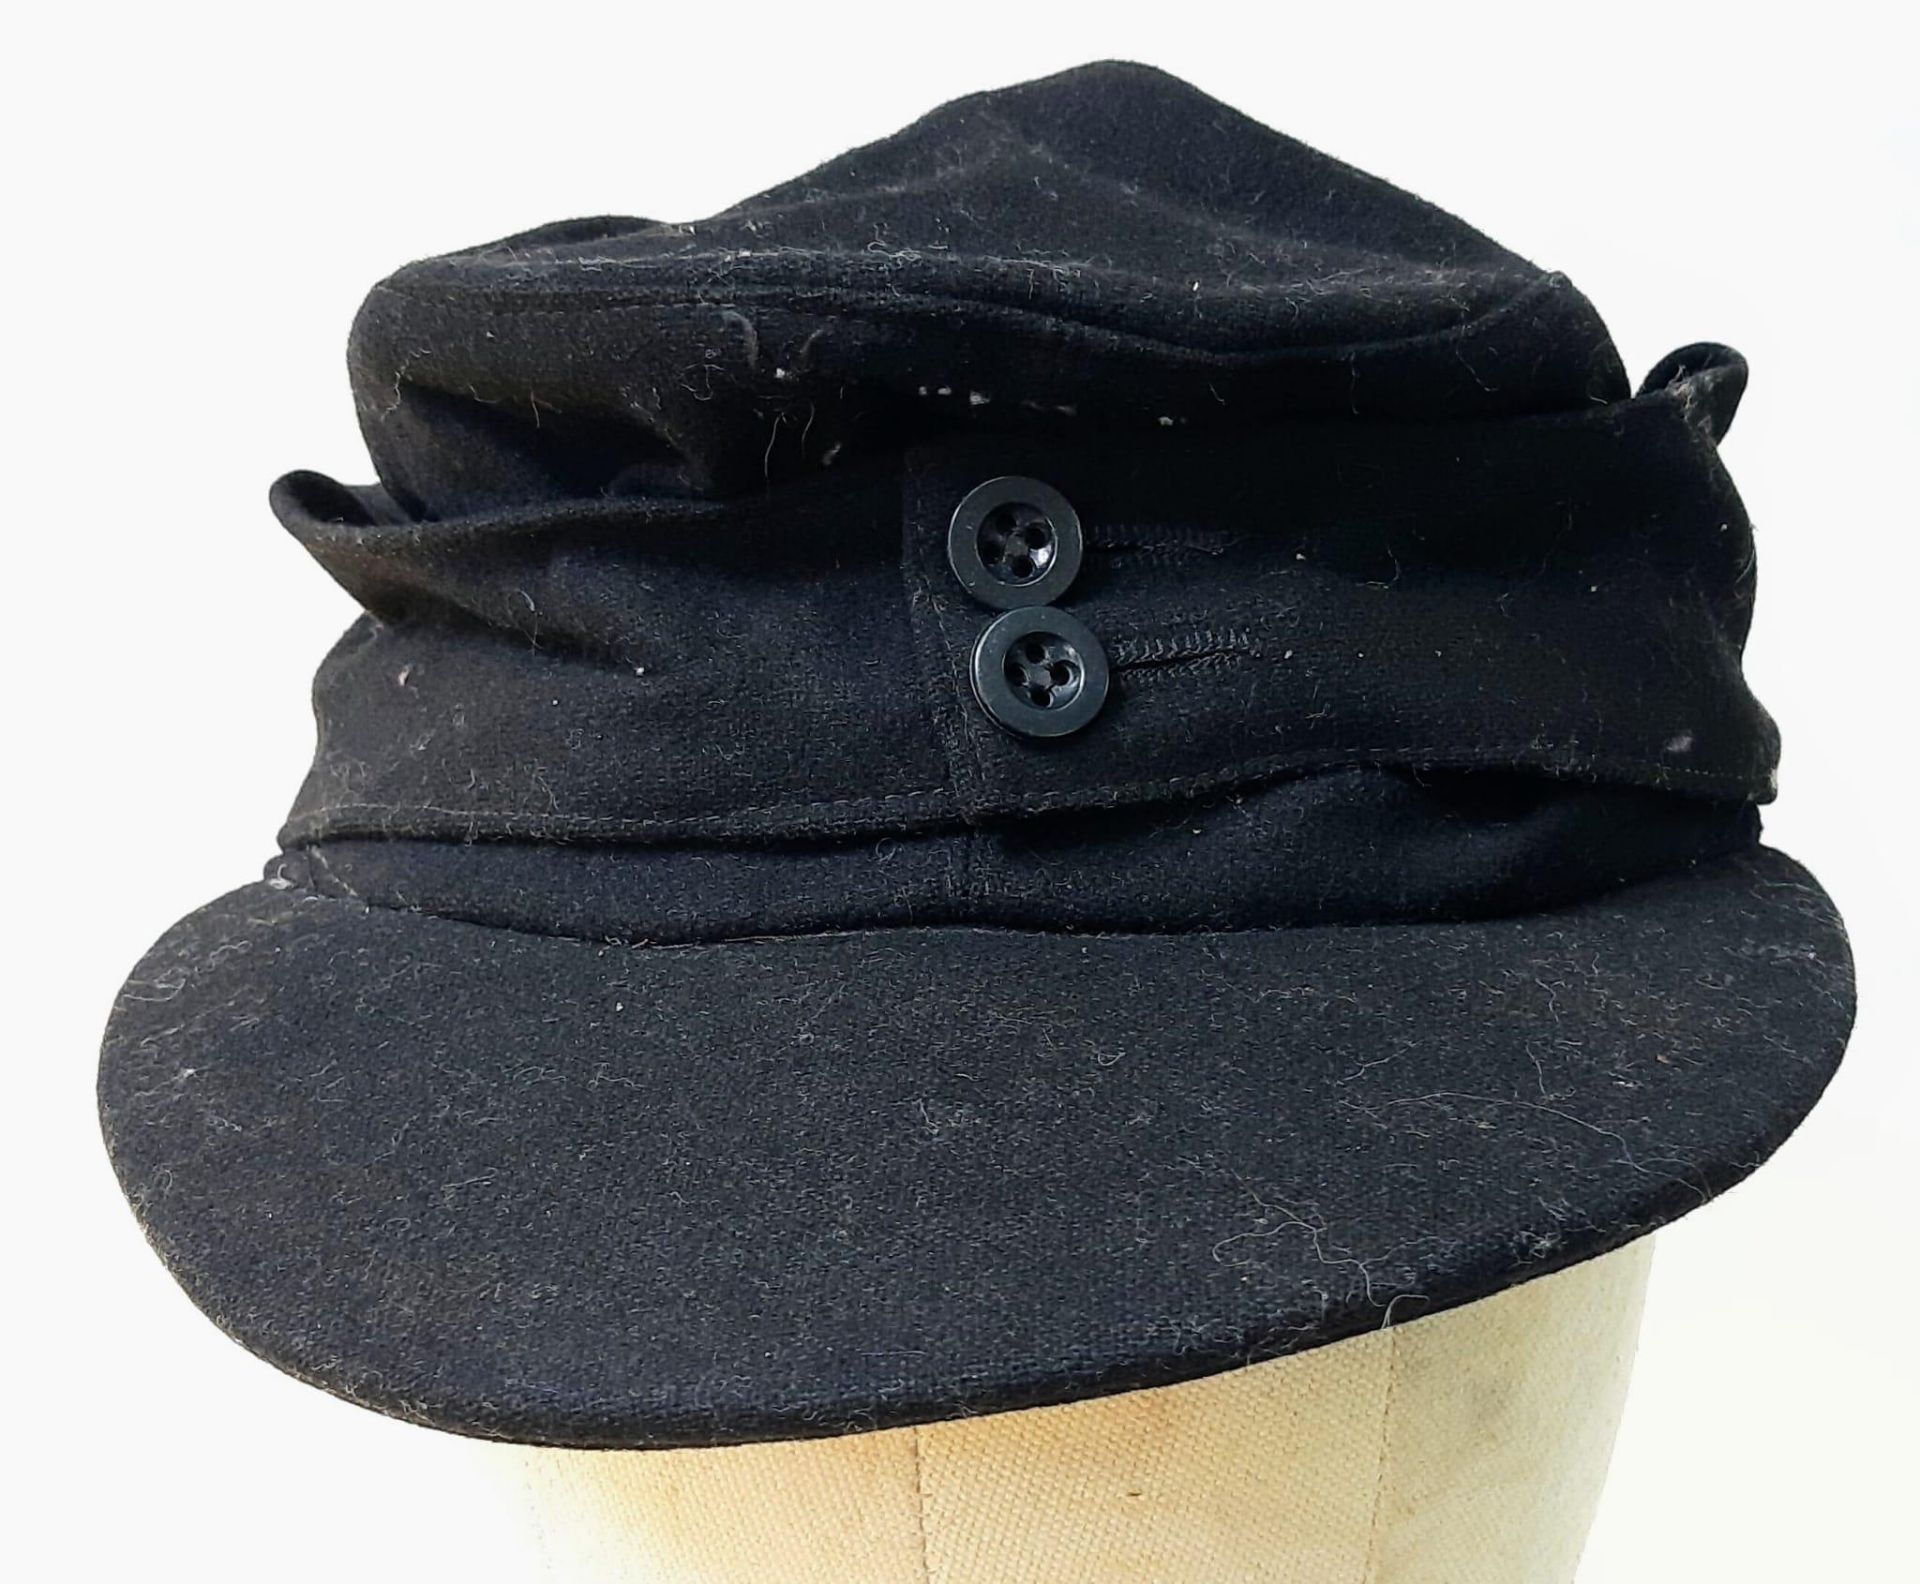 WW2 German M43 Panzer Side Cap. Black wool construction with removed insignia, (maybe P.O.W). The